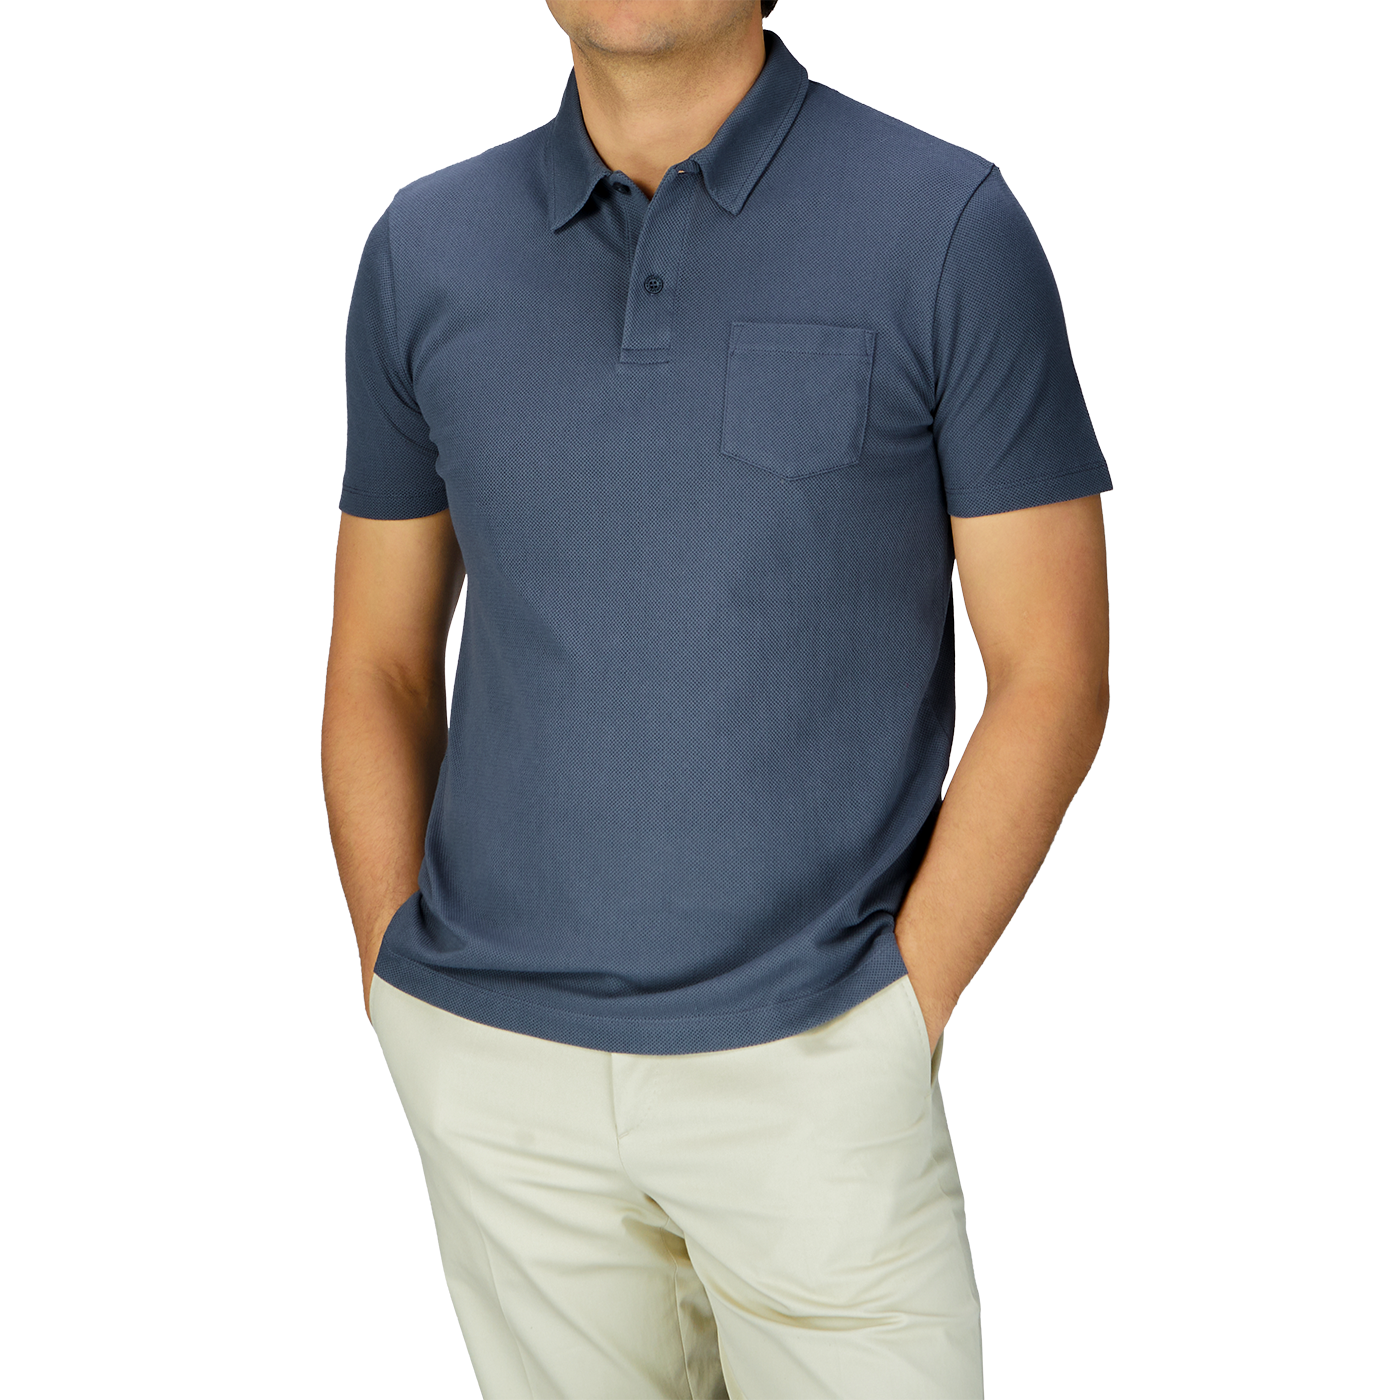 James Bond sports a classic Slate Blue Cotton Riviera Polo Shirt by Sunspel, paired with khaki pants.